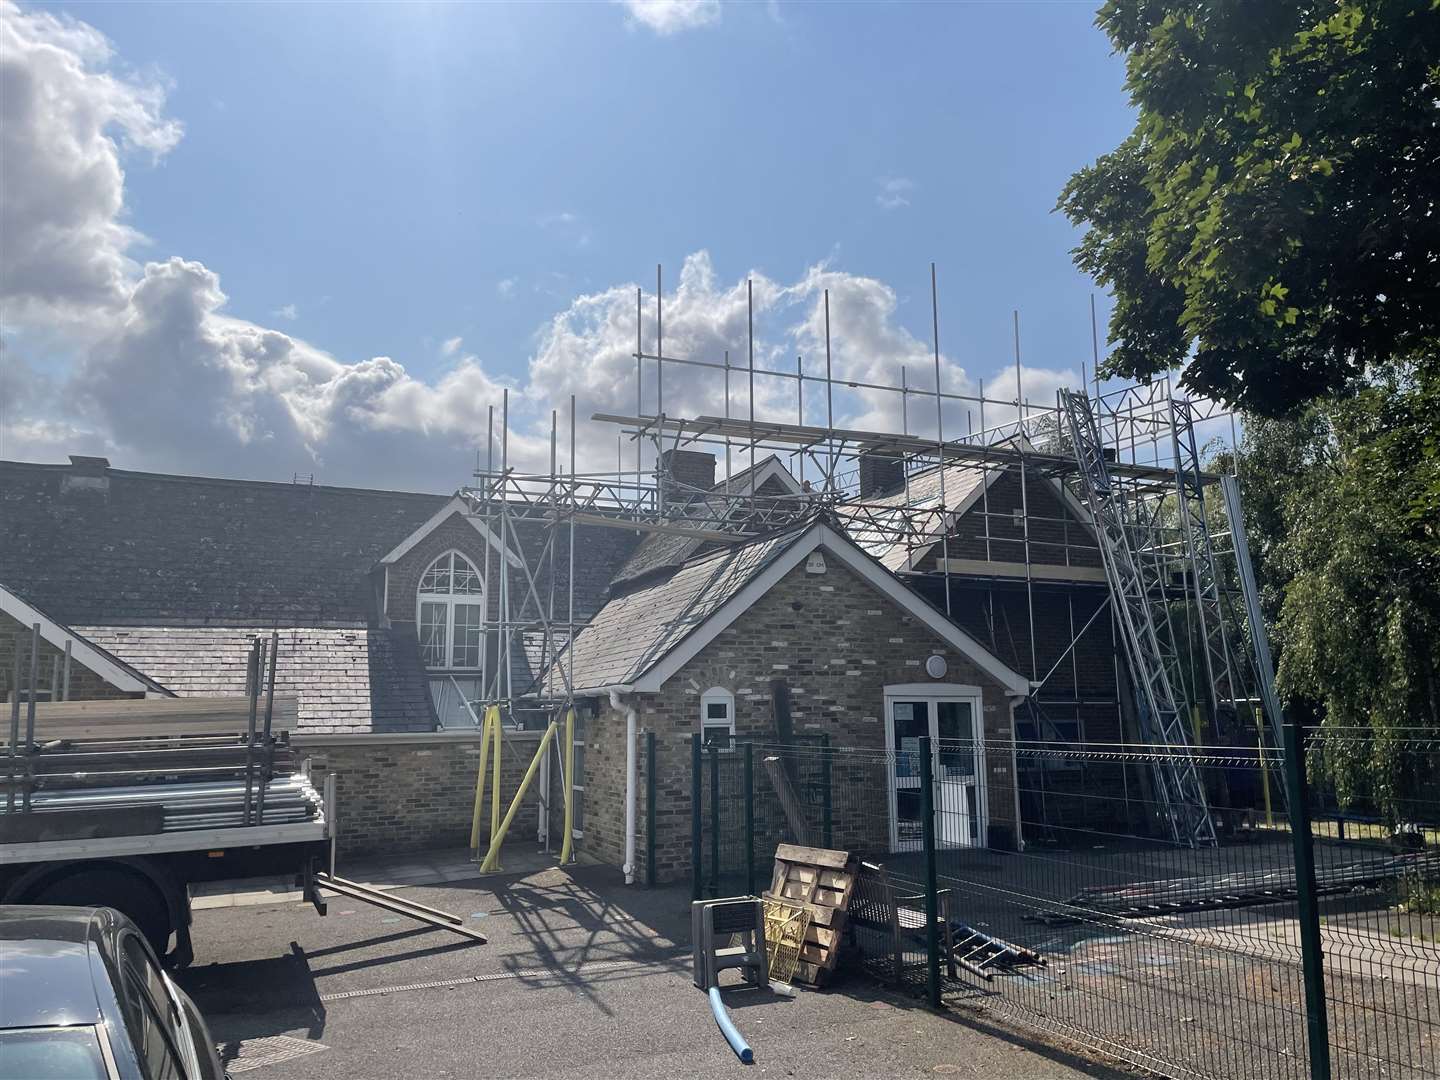 Scaffolding has been put up as workers try to fix the roof at Bobbing Village school